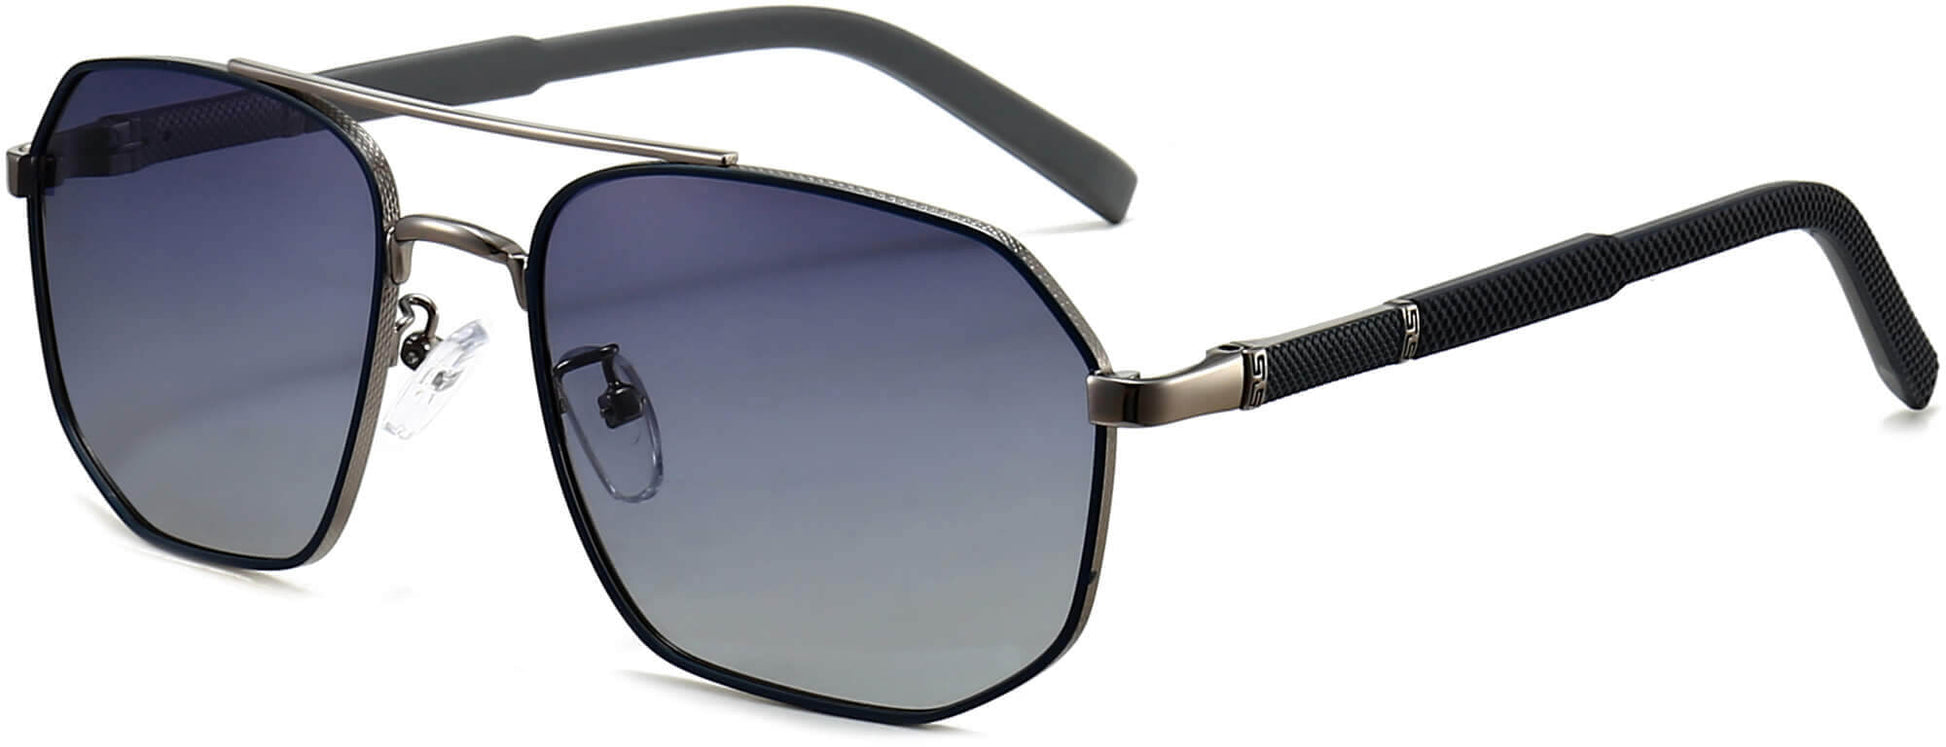 Luis Silver Stainless steel Sunglasses from ANRRI, angle view